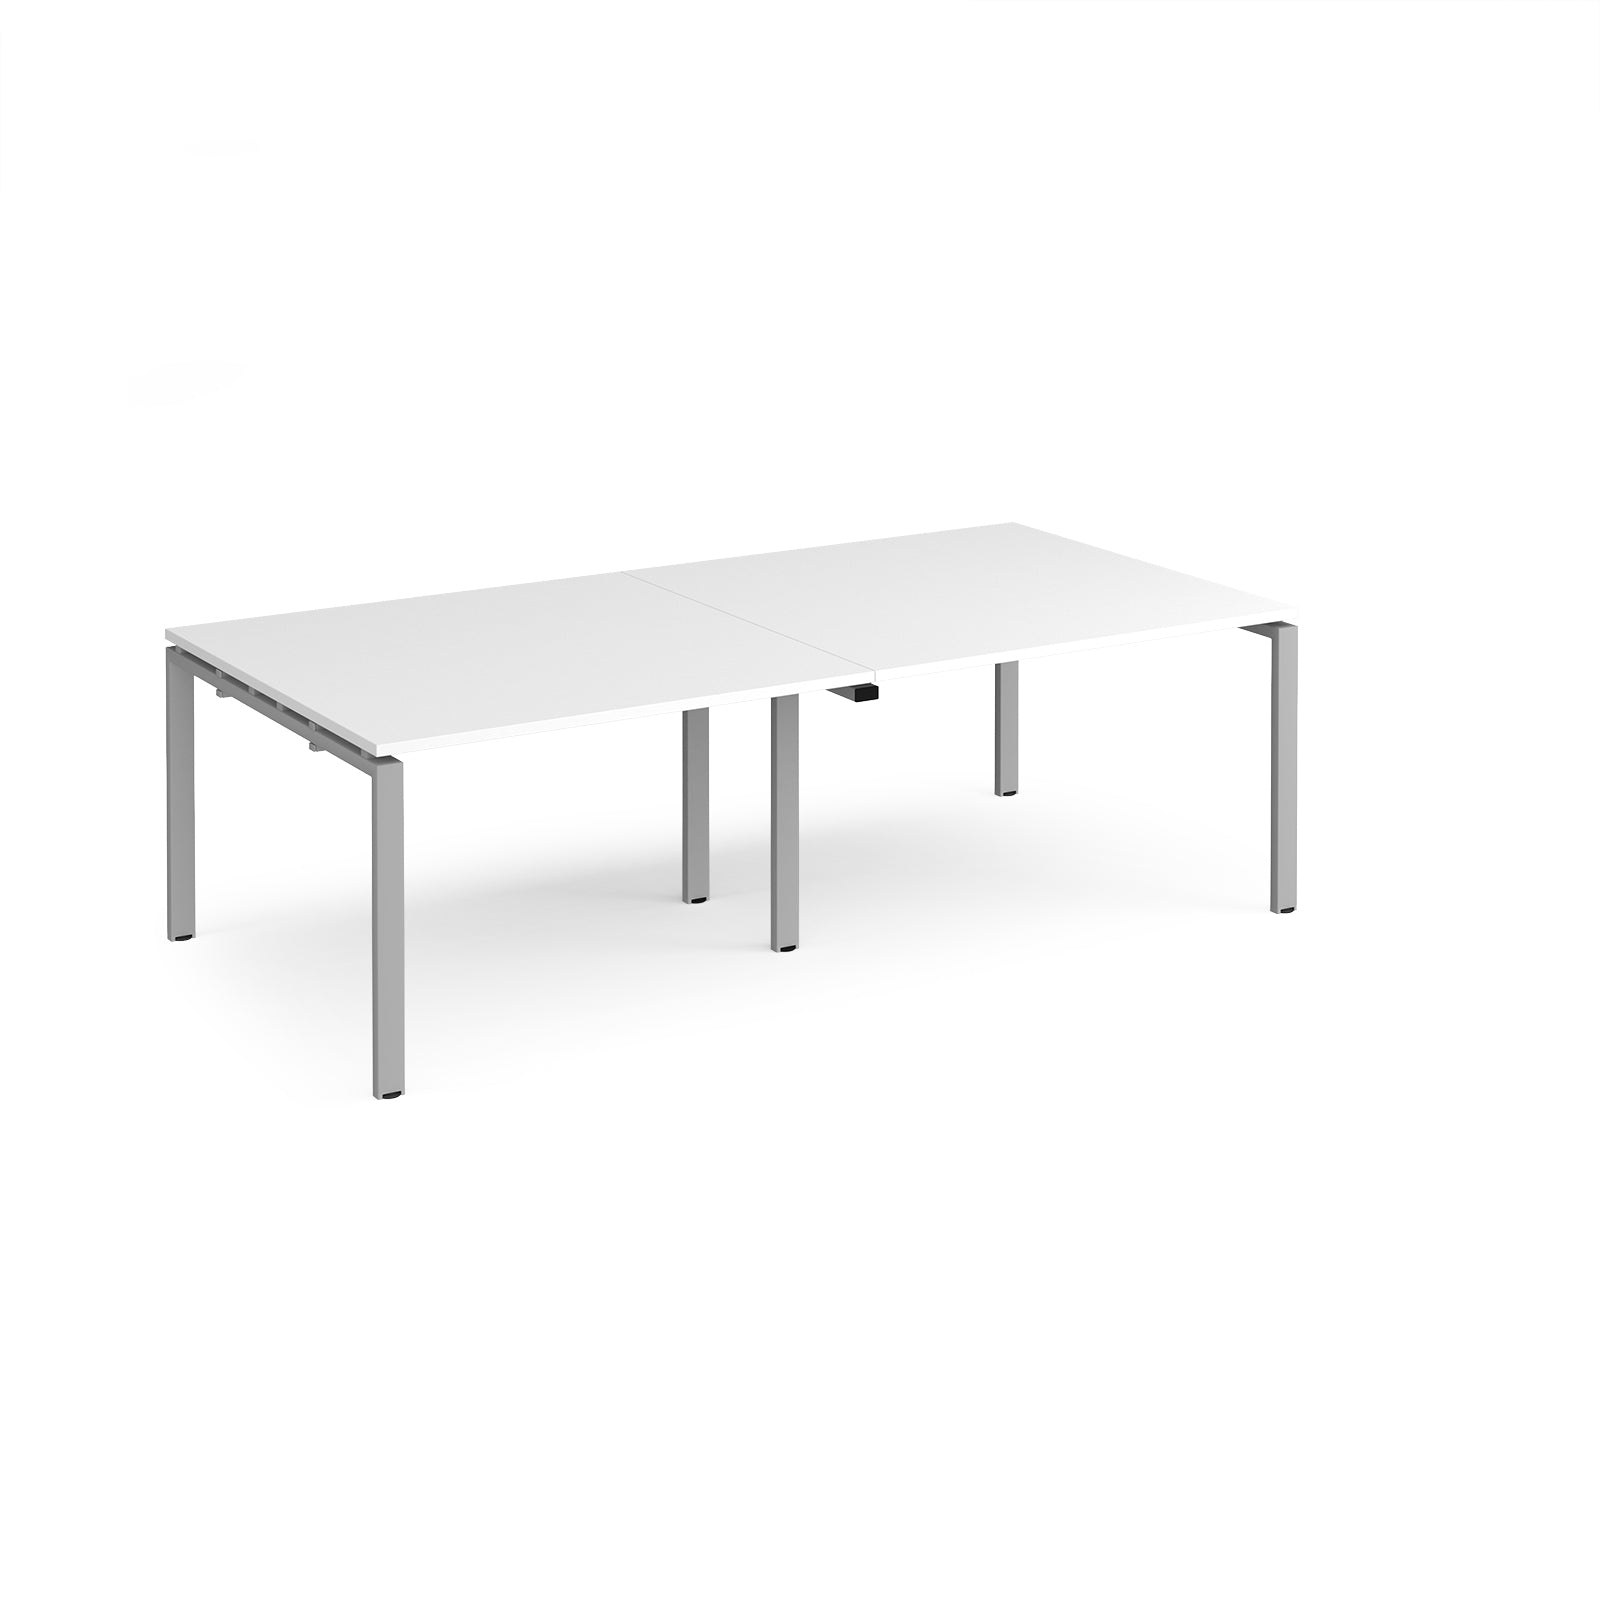 Adapt Modular Boardroom Table - Multiple Sizes and Configurations